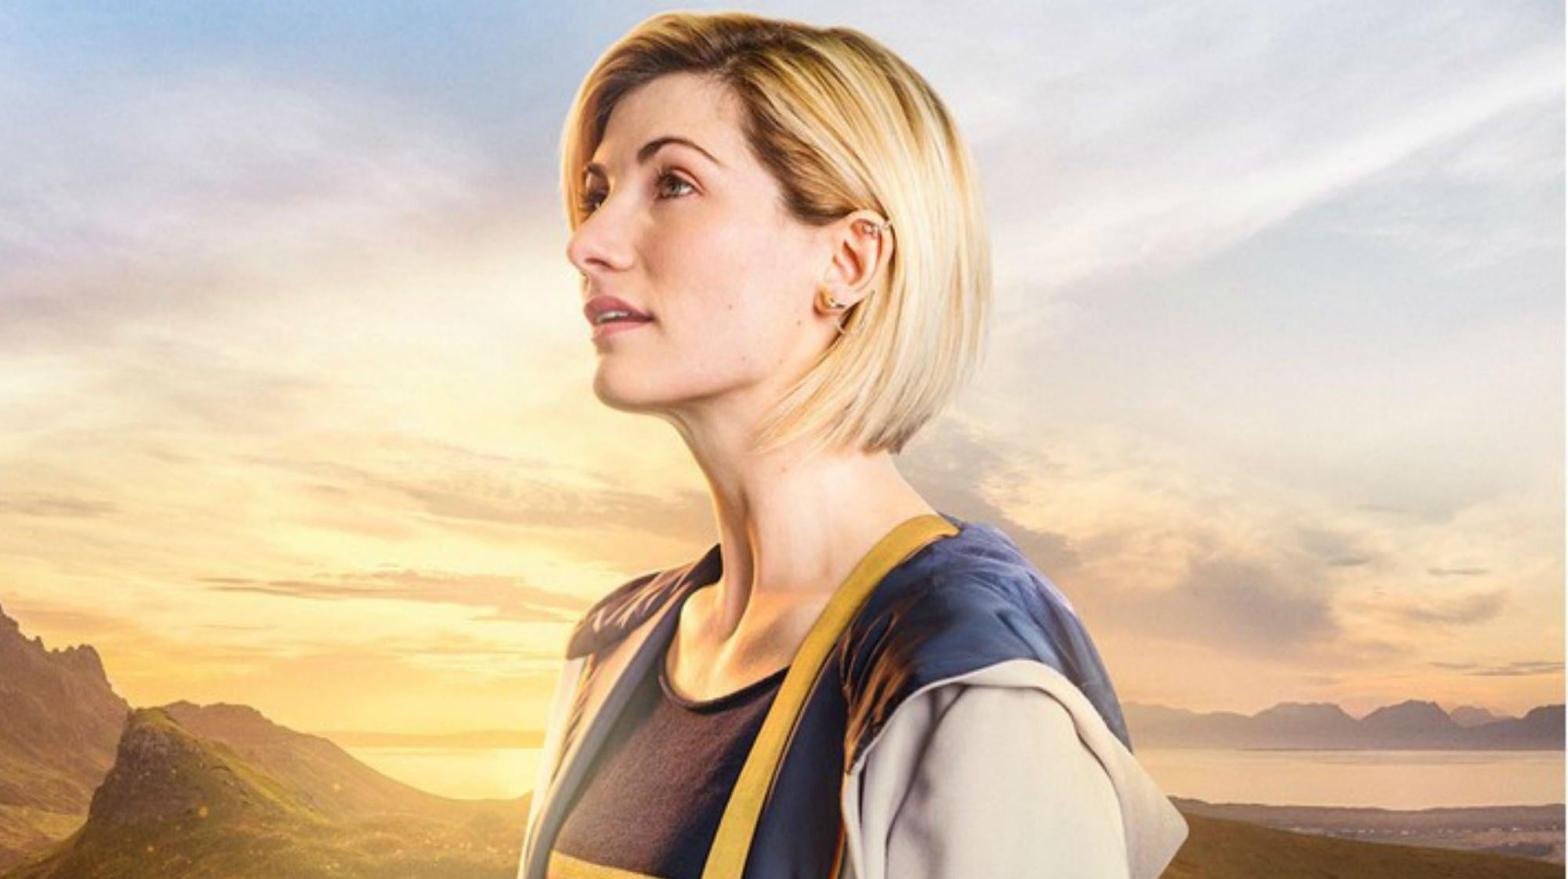 Jodie Whittaker is Doctor Who (Image: BBC)